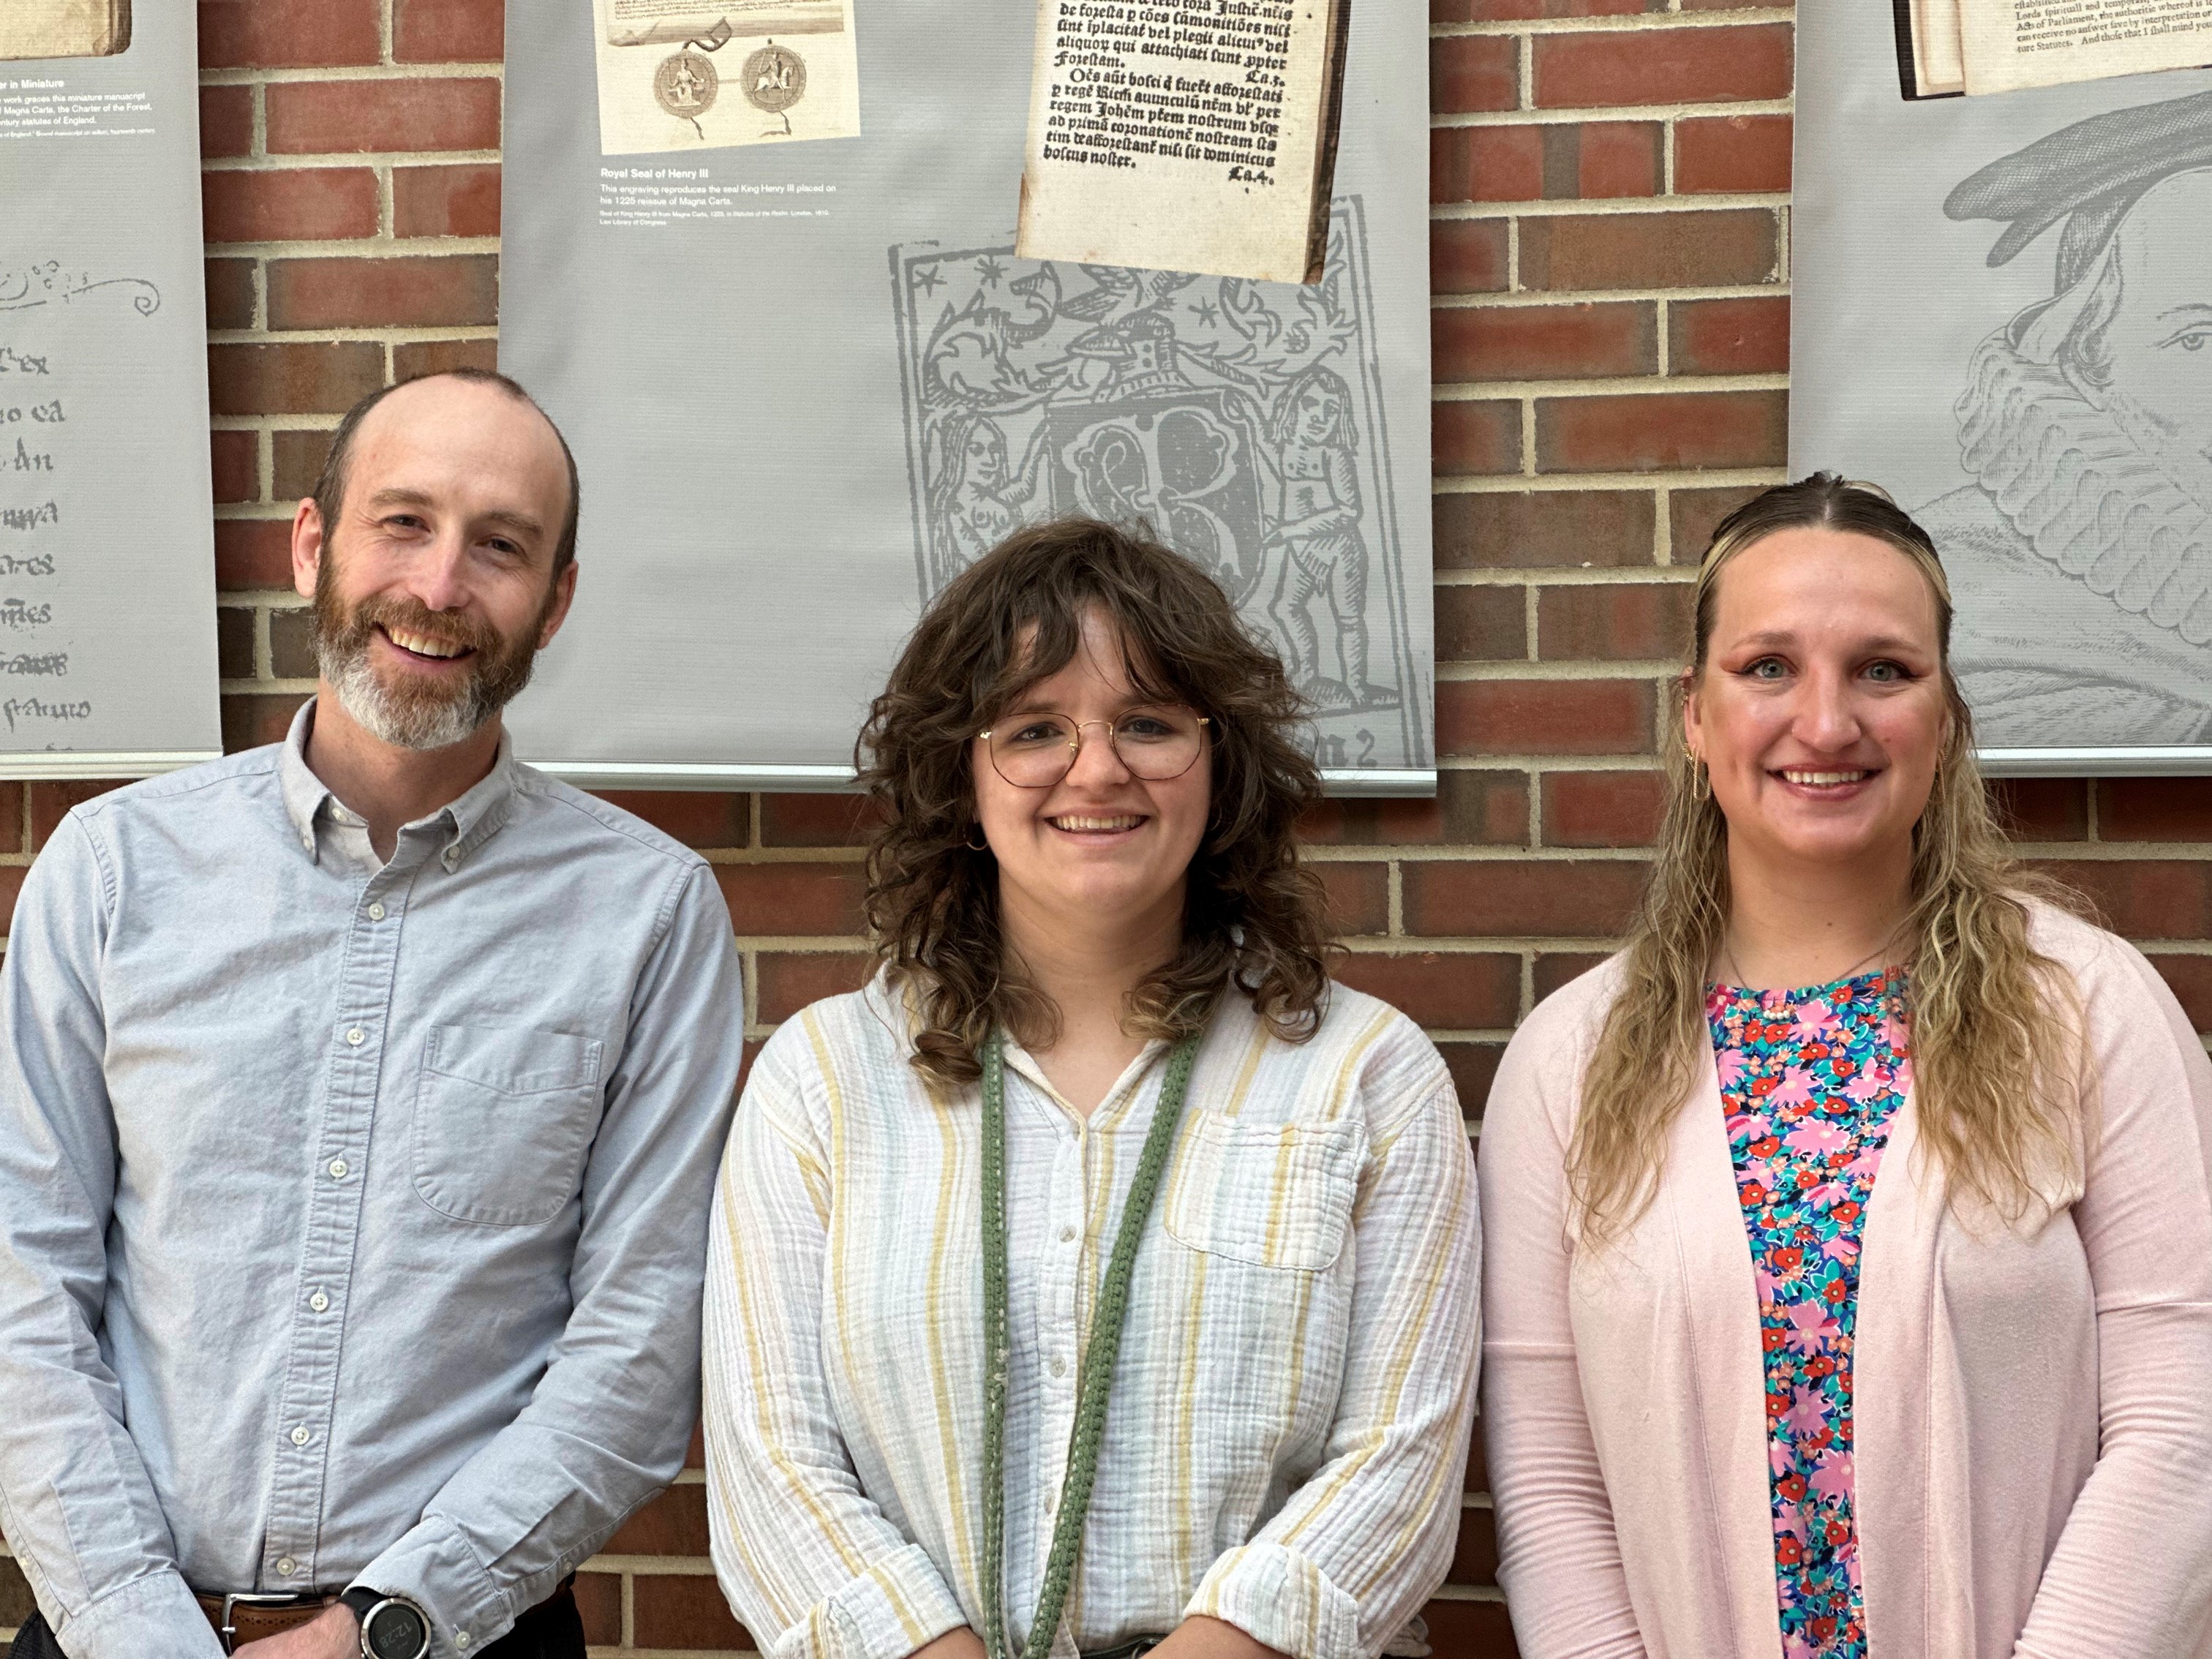 Associate Professor Justin Simard is joined by Cass Technical High School teacher Taylor Sastre and law student Hannah Gates at the MSU College of Law. Sastre and her students met the dean and other faculty members during a campus visit in April.